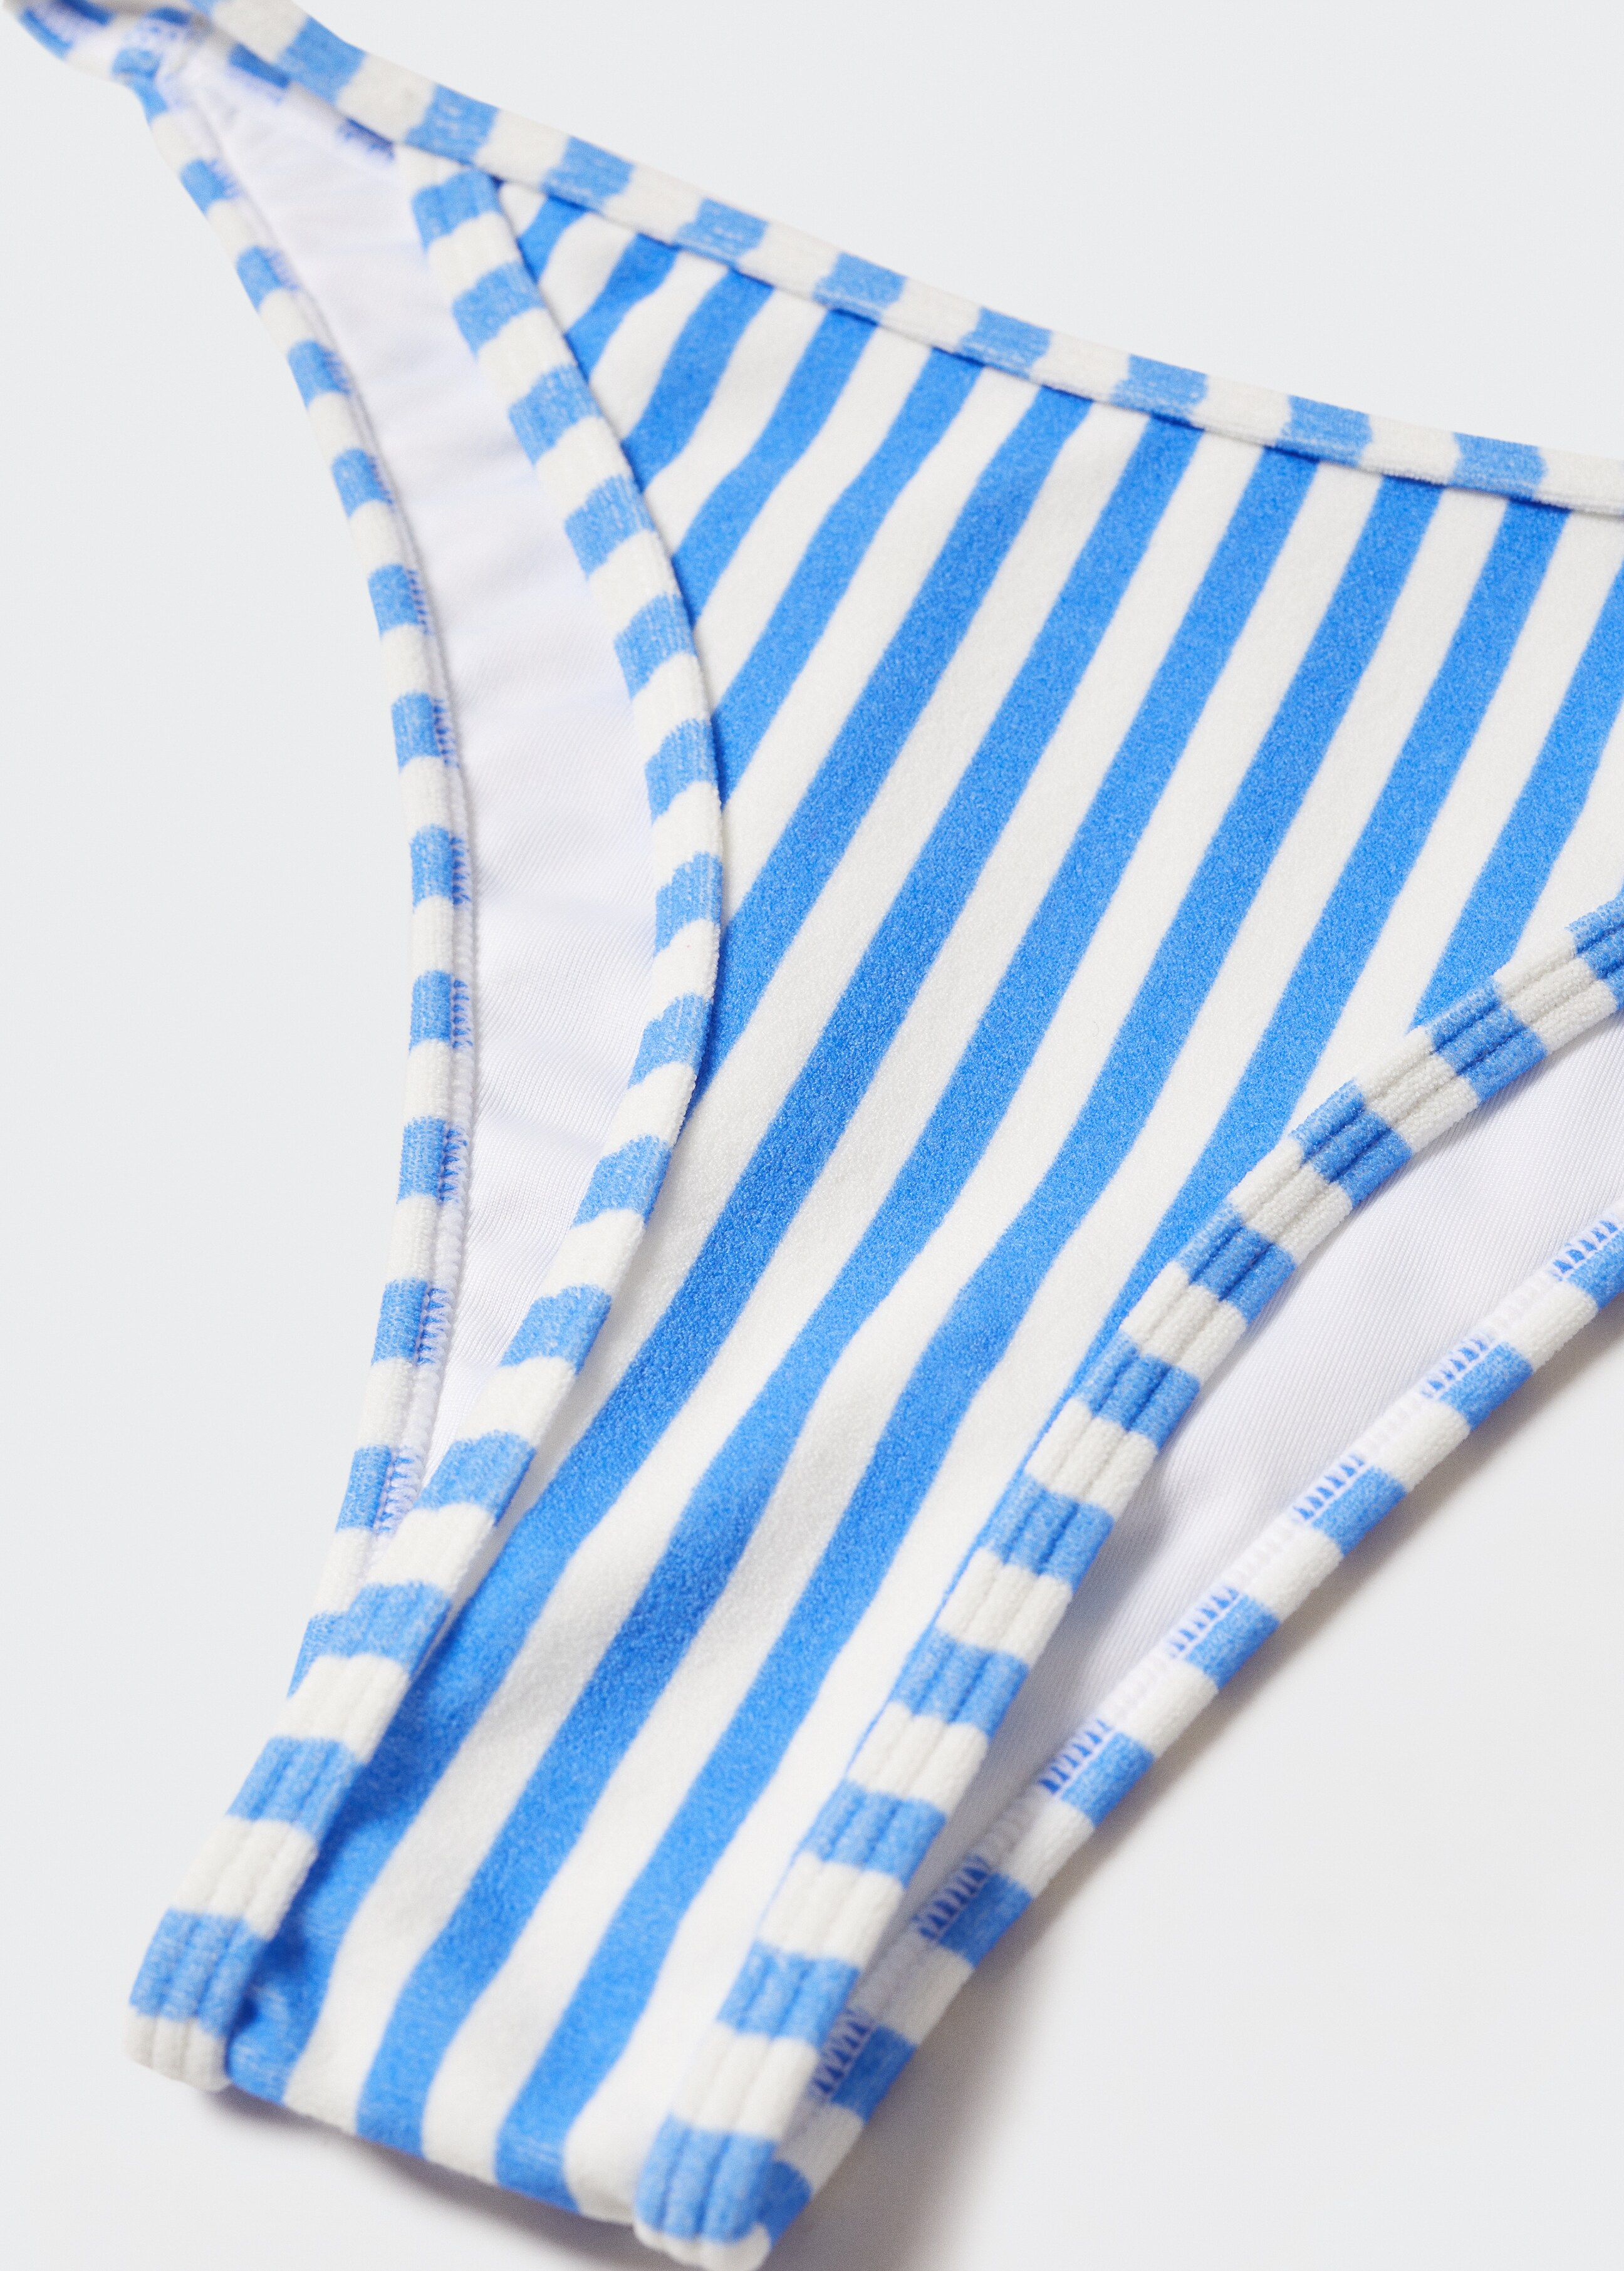 Classic striped bikini bottoms - Details of the article 8